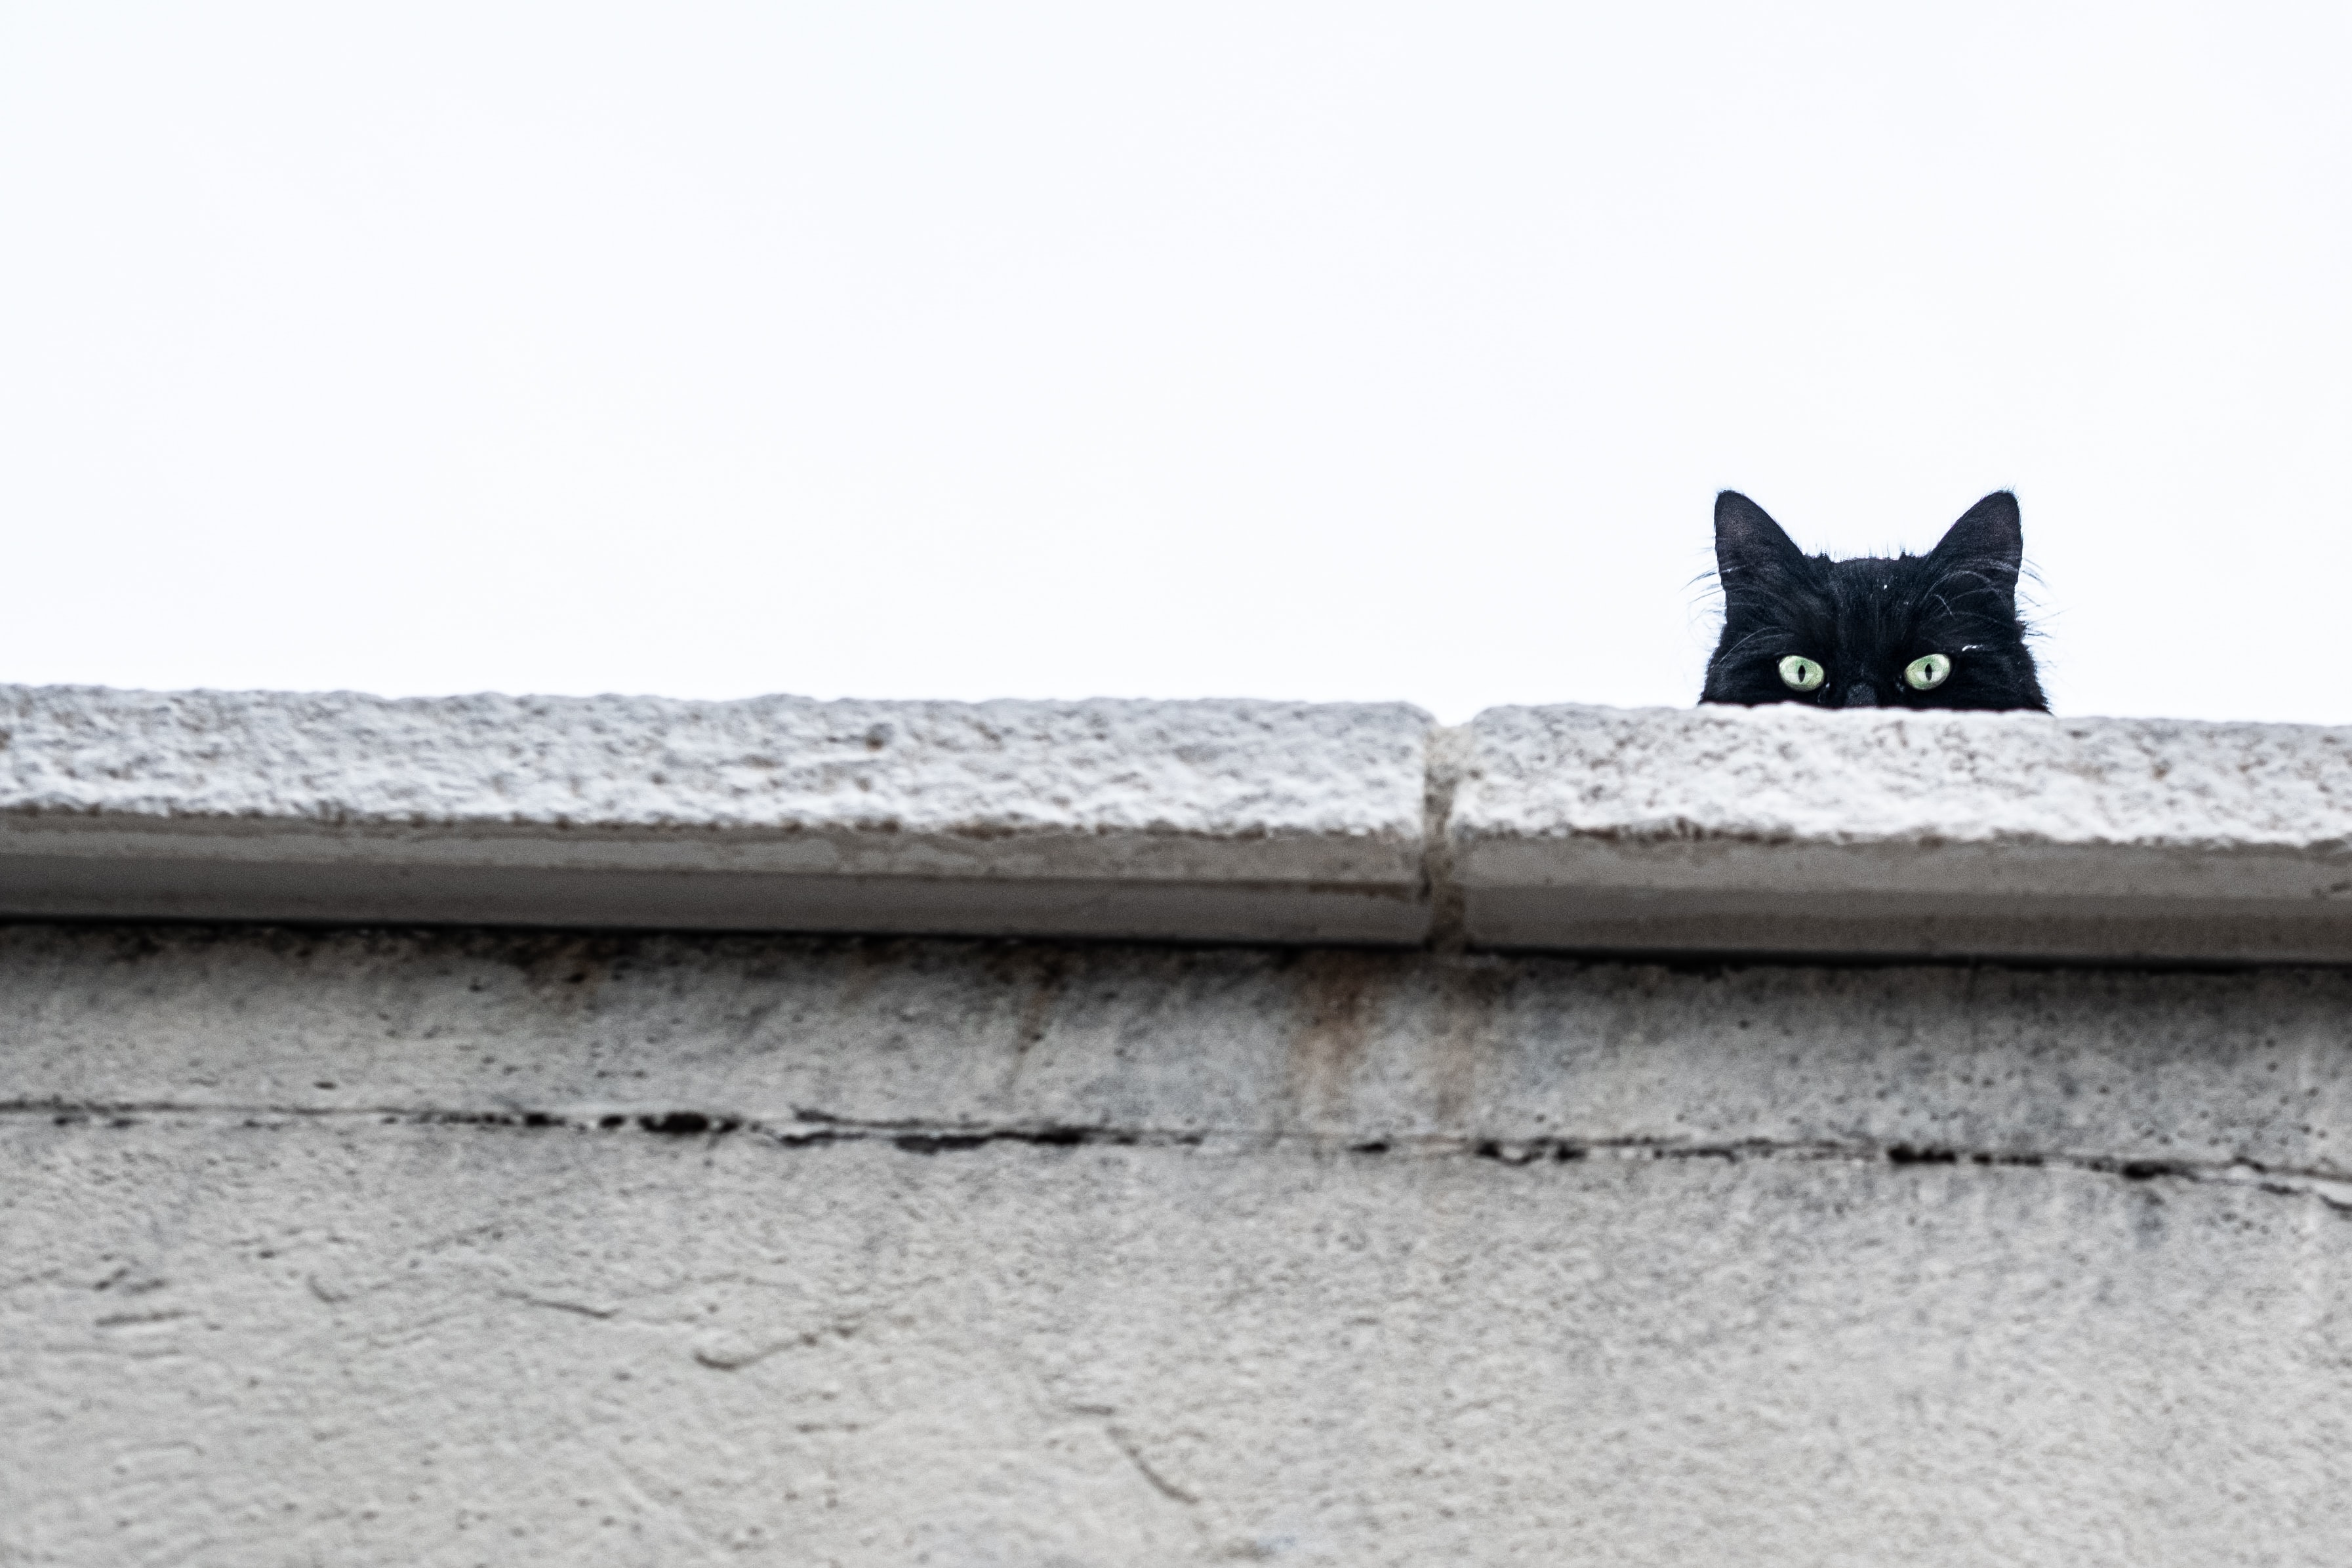 a black cat looking over a stone wall against a gray cloudy background